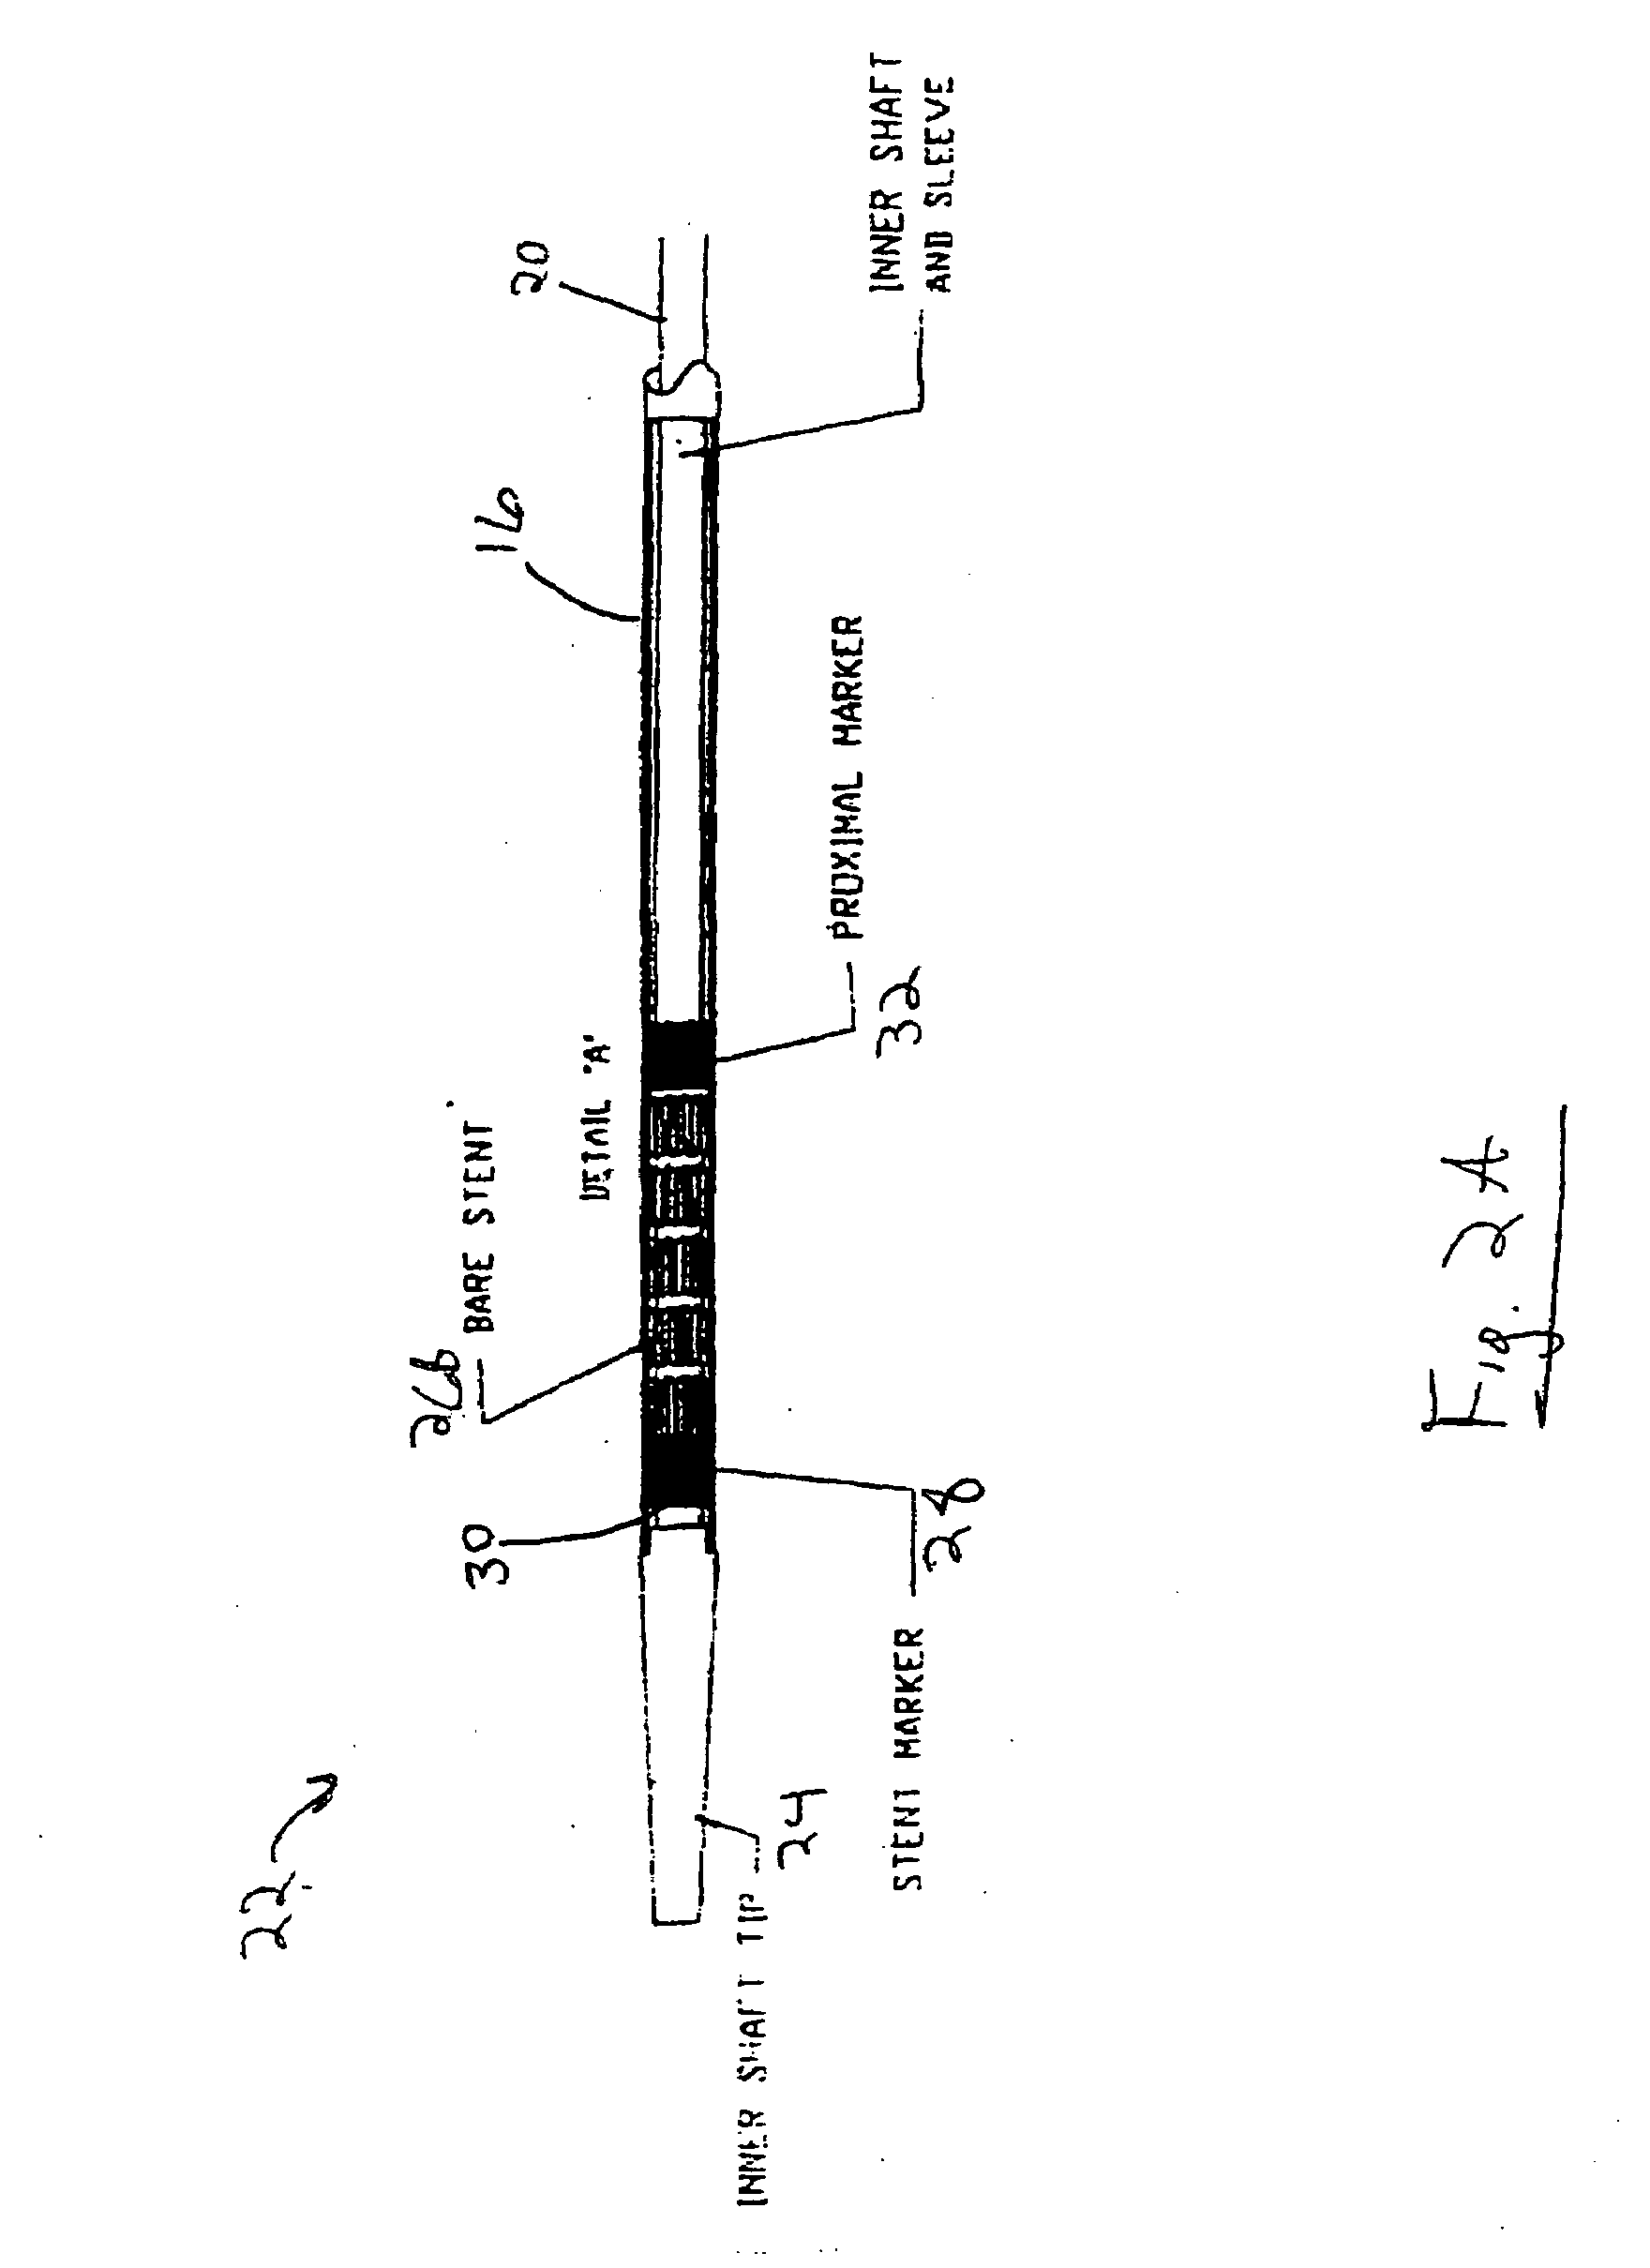 Multiple in vivo implant delivery device